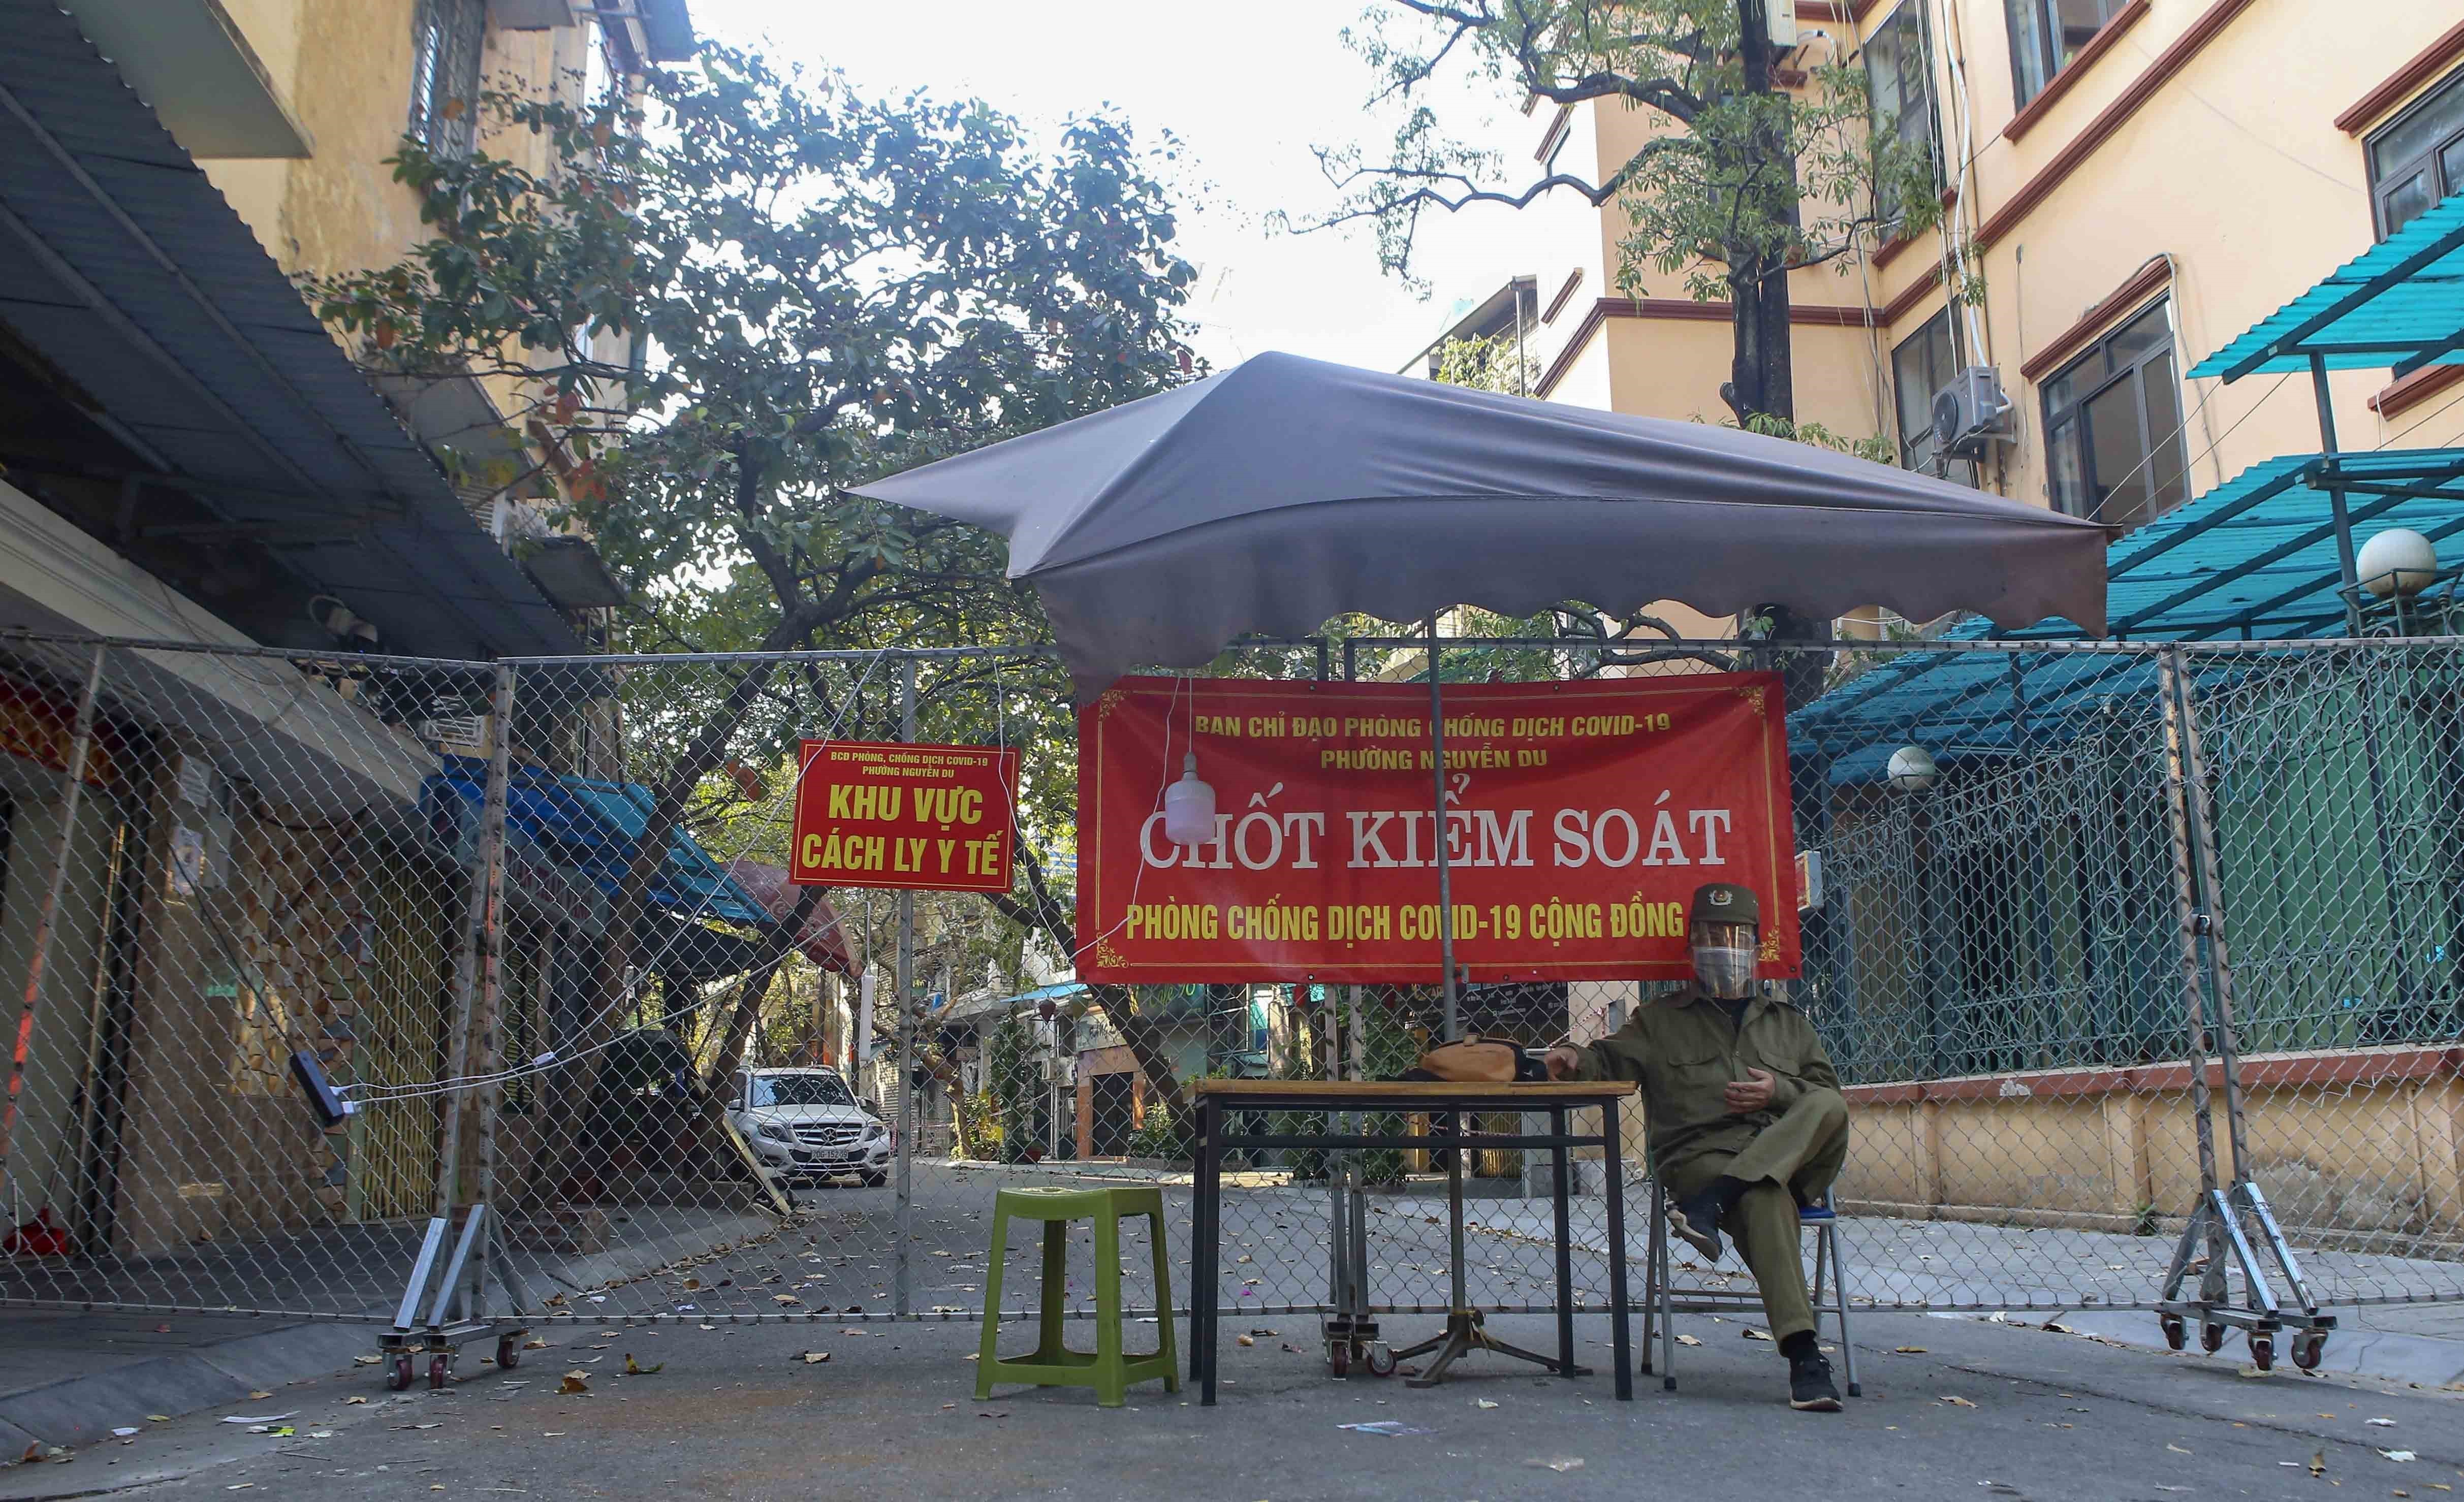 Hanoi brings back COVID-19 barriers as cases surge